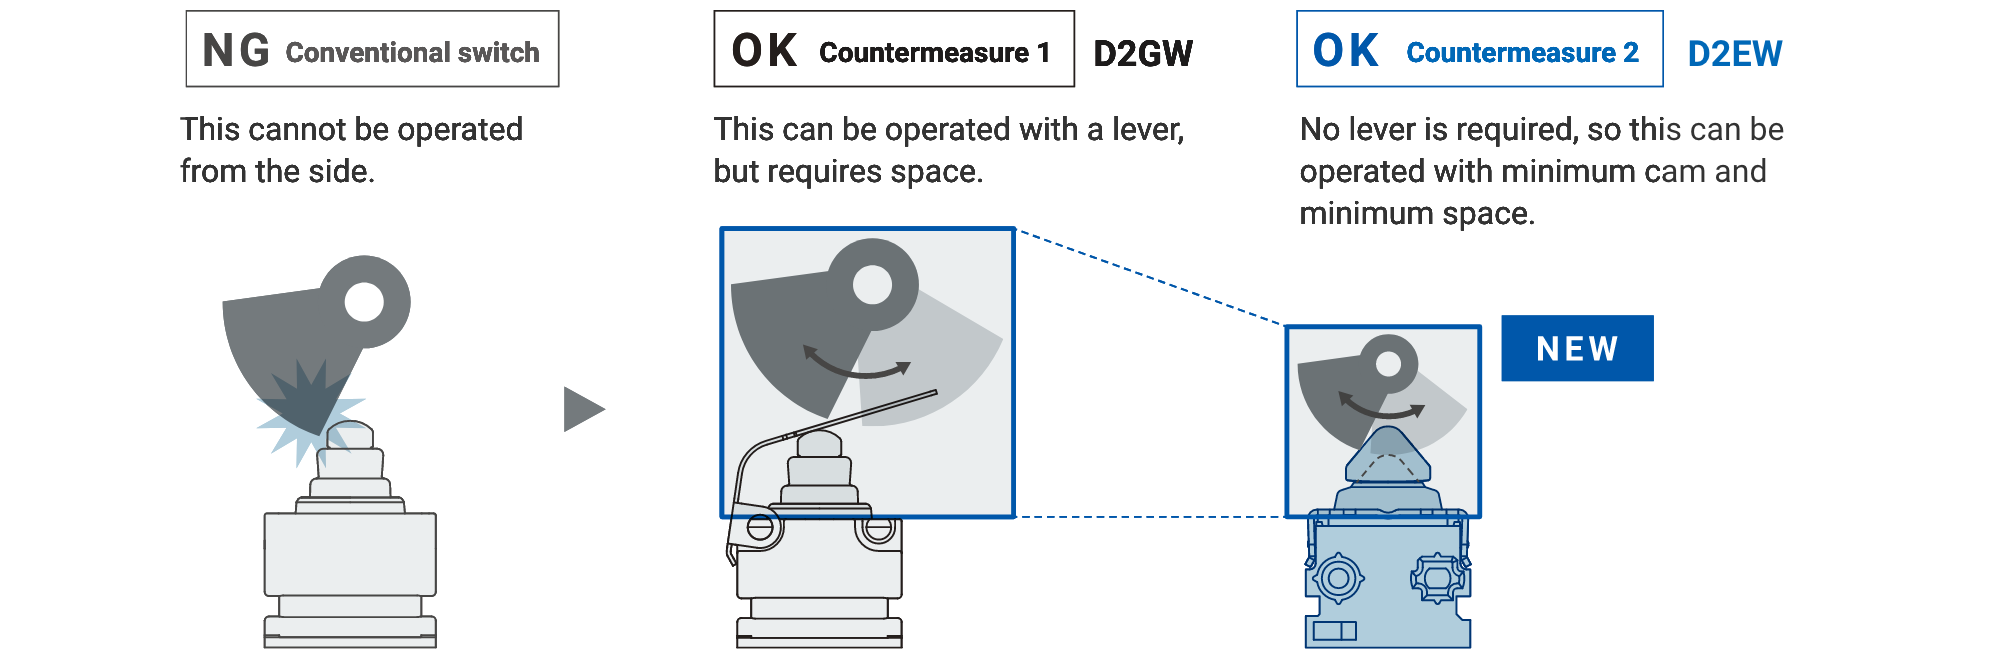 [NG  Conventional switch]：This cannot be operated from the side. [OK  Countermeasure 1]D2GW：This can be operated with a lever, but requires space. [OK  Countermeasure 2]D2EW：No lever is required, so this can be operated with minimum cam and minimum space. (NEW)